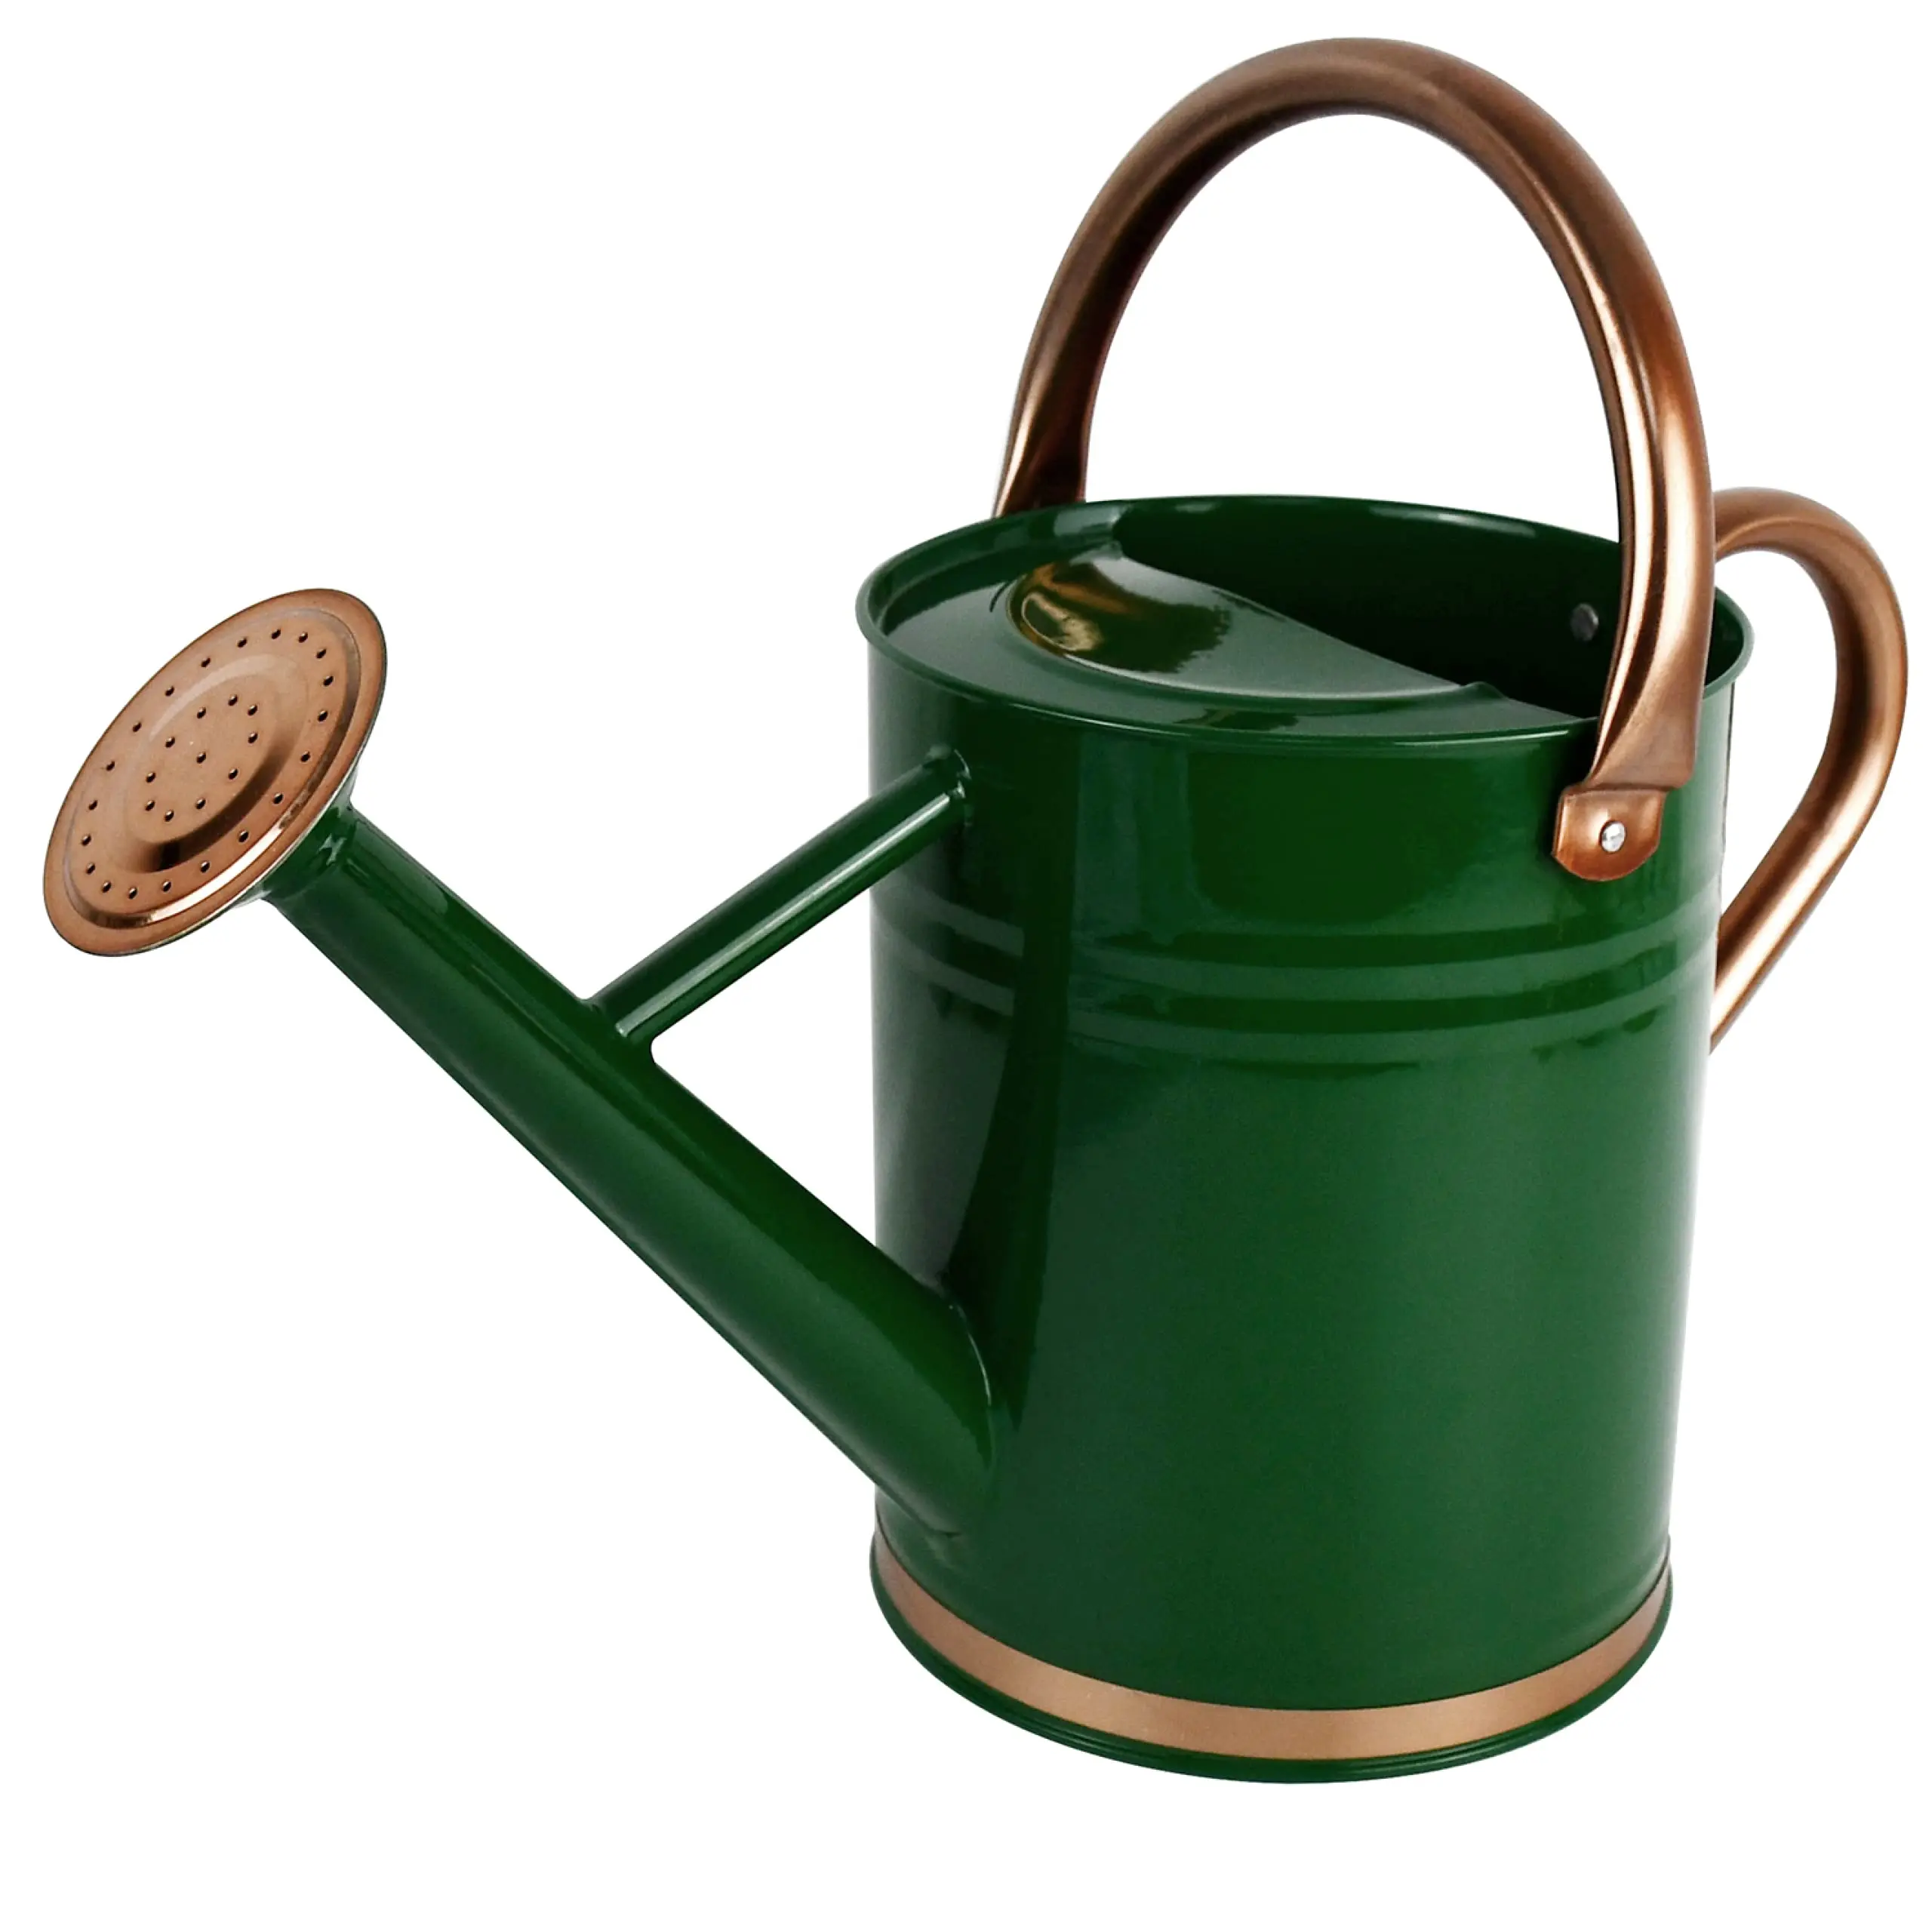 1 Gallon Copper Colored Watering Can - Metal Watering Can With Removable Spout